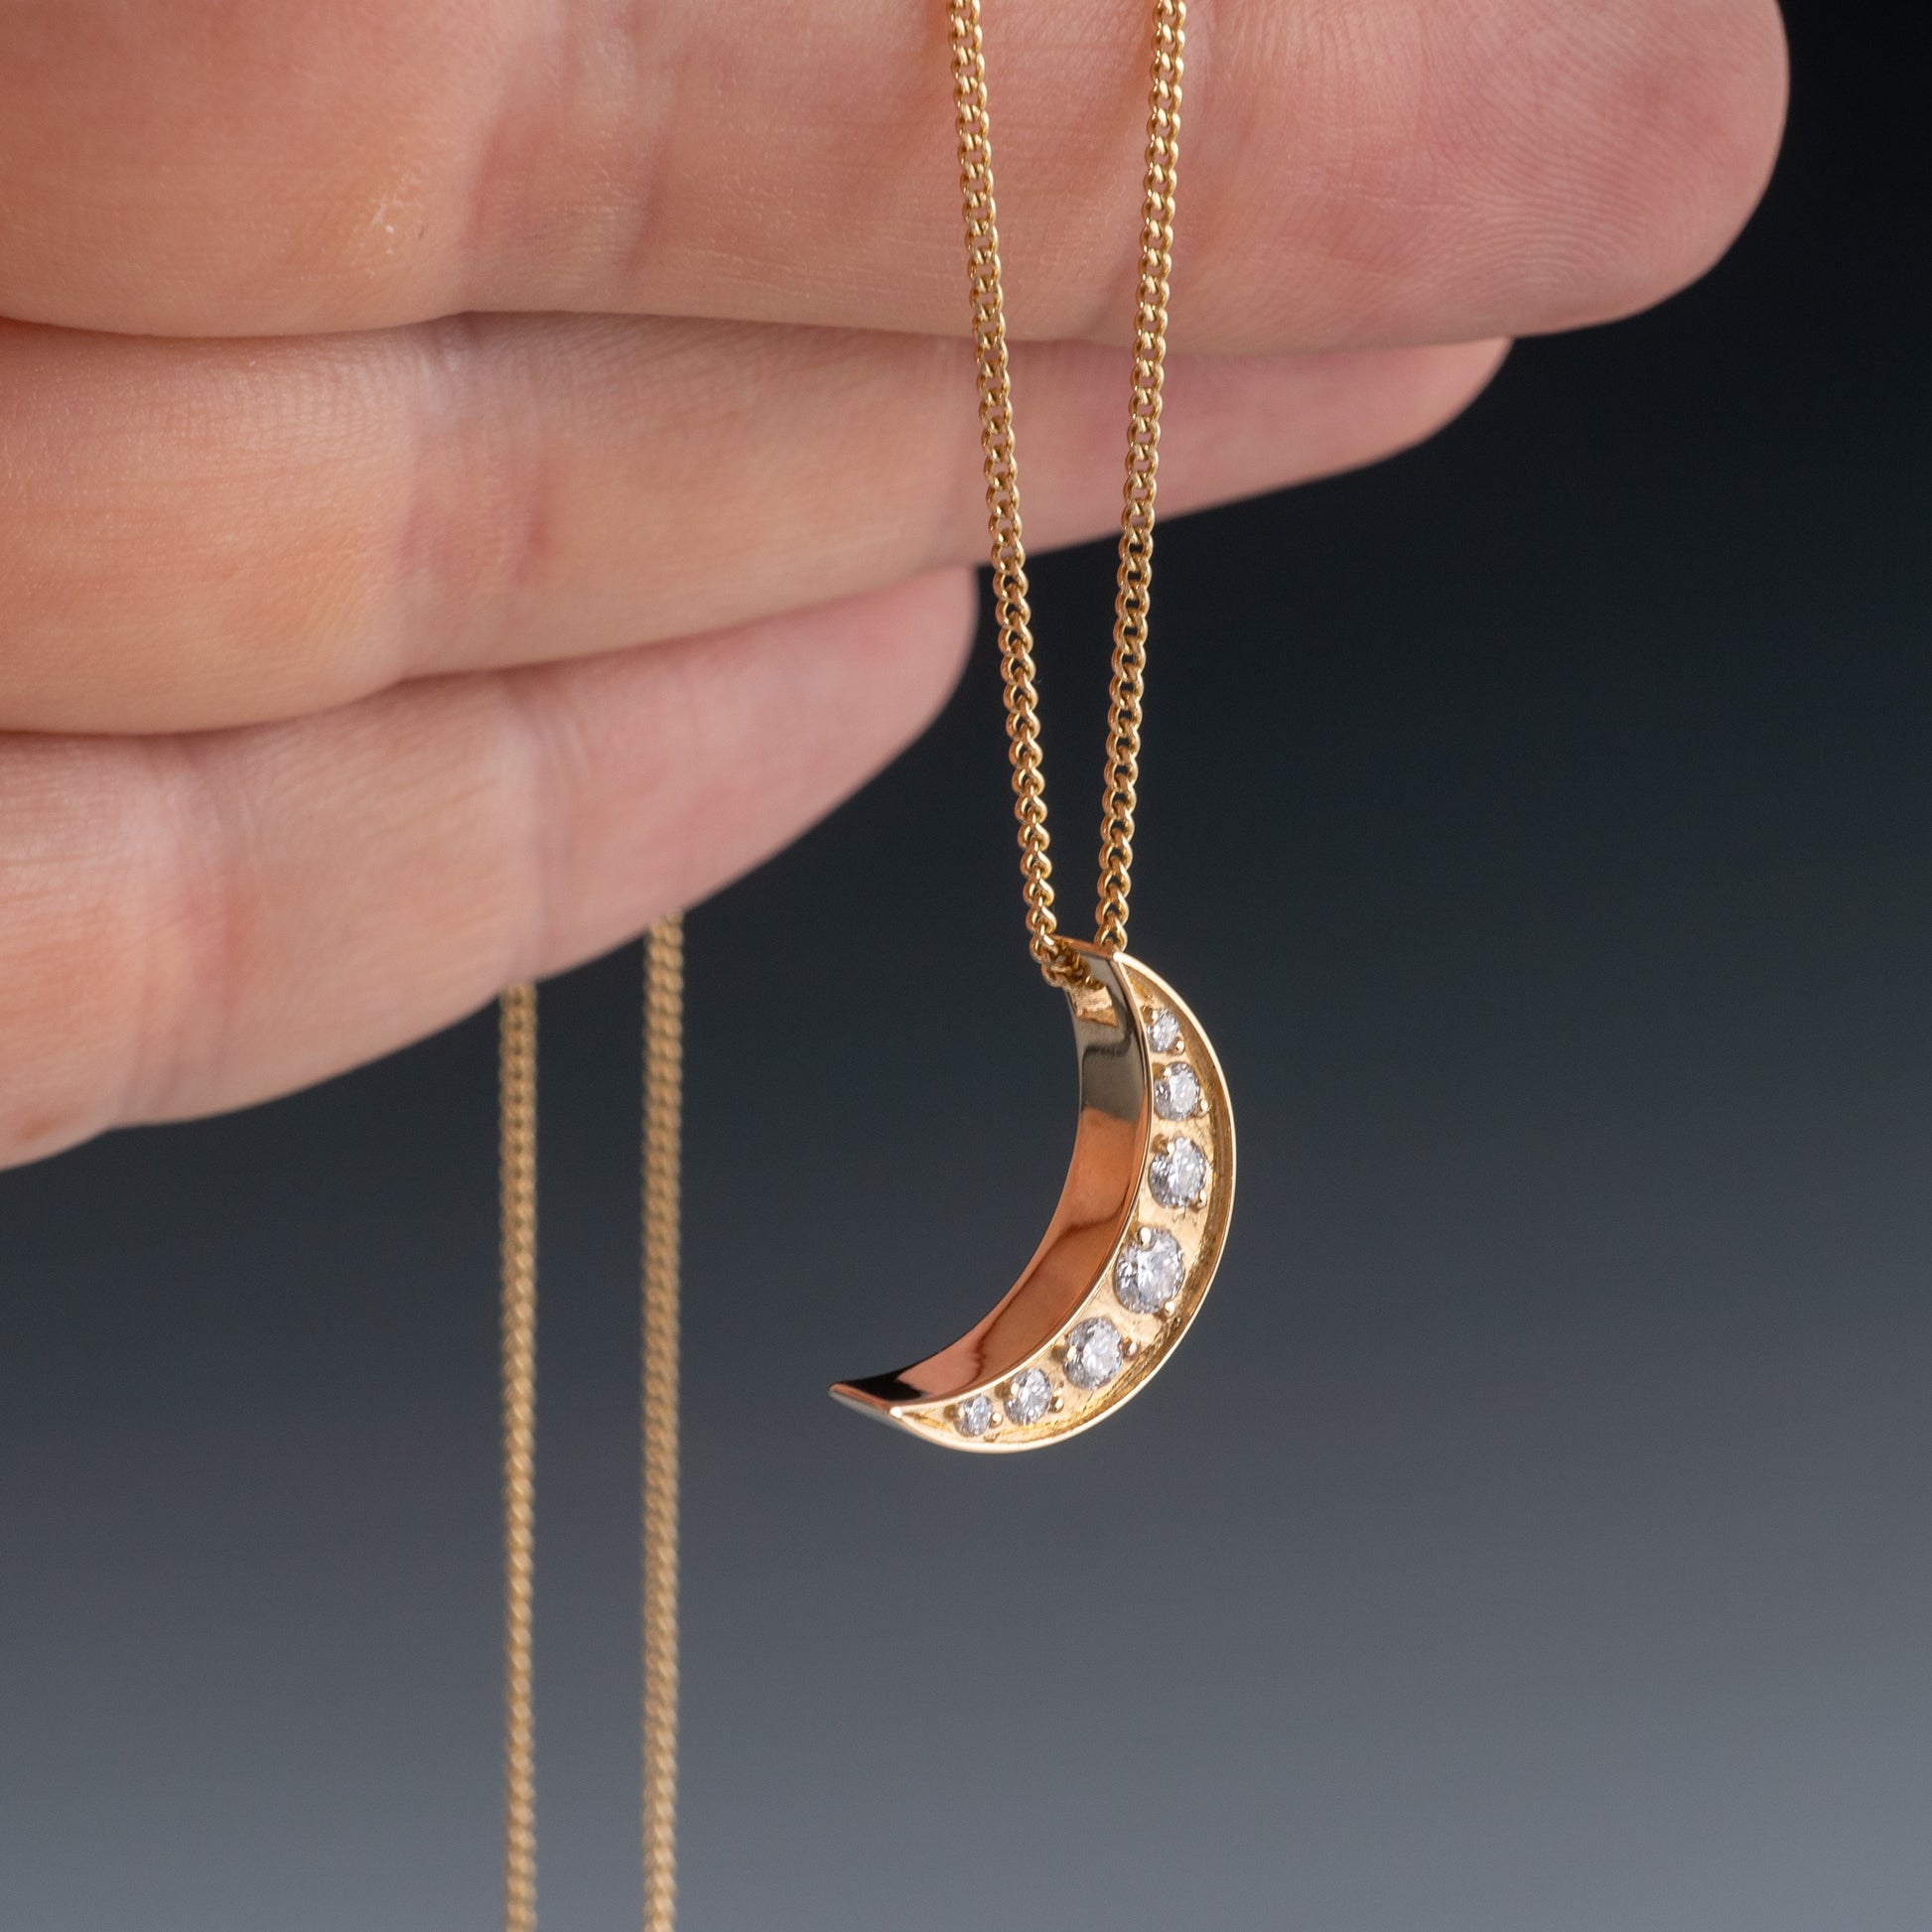 9ct Gold Chunky Moon Pendant Necklace With Diamonds - Hunters Fine Jewellery